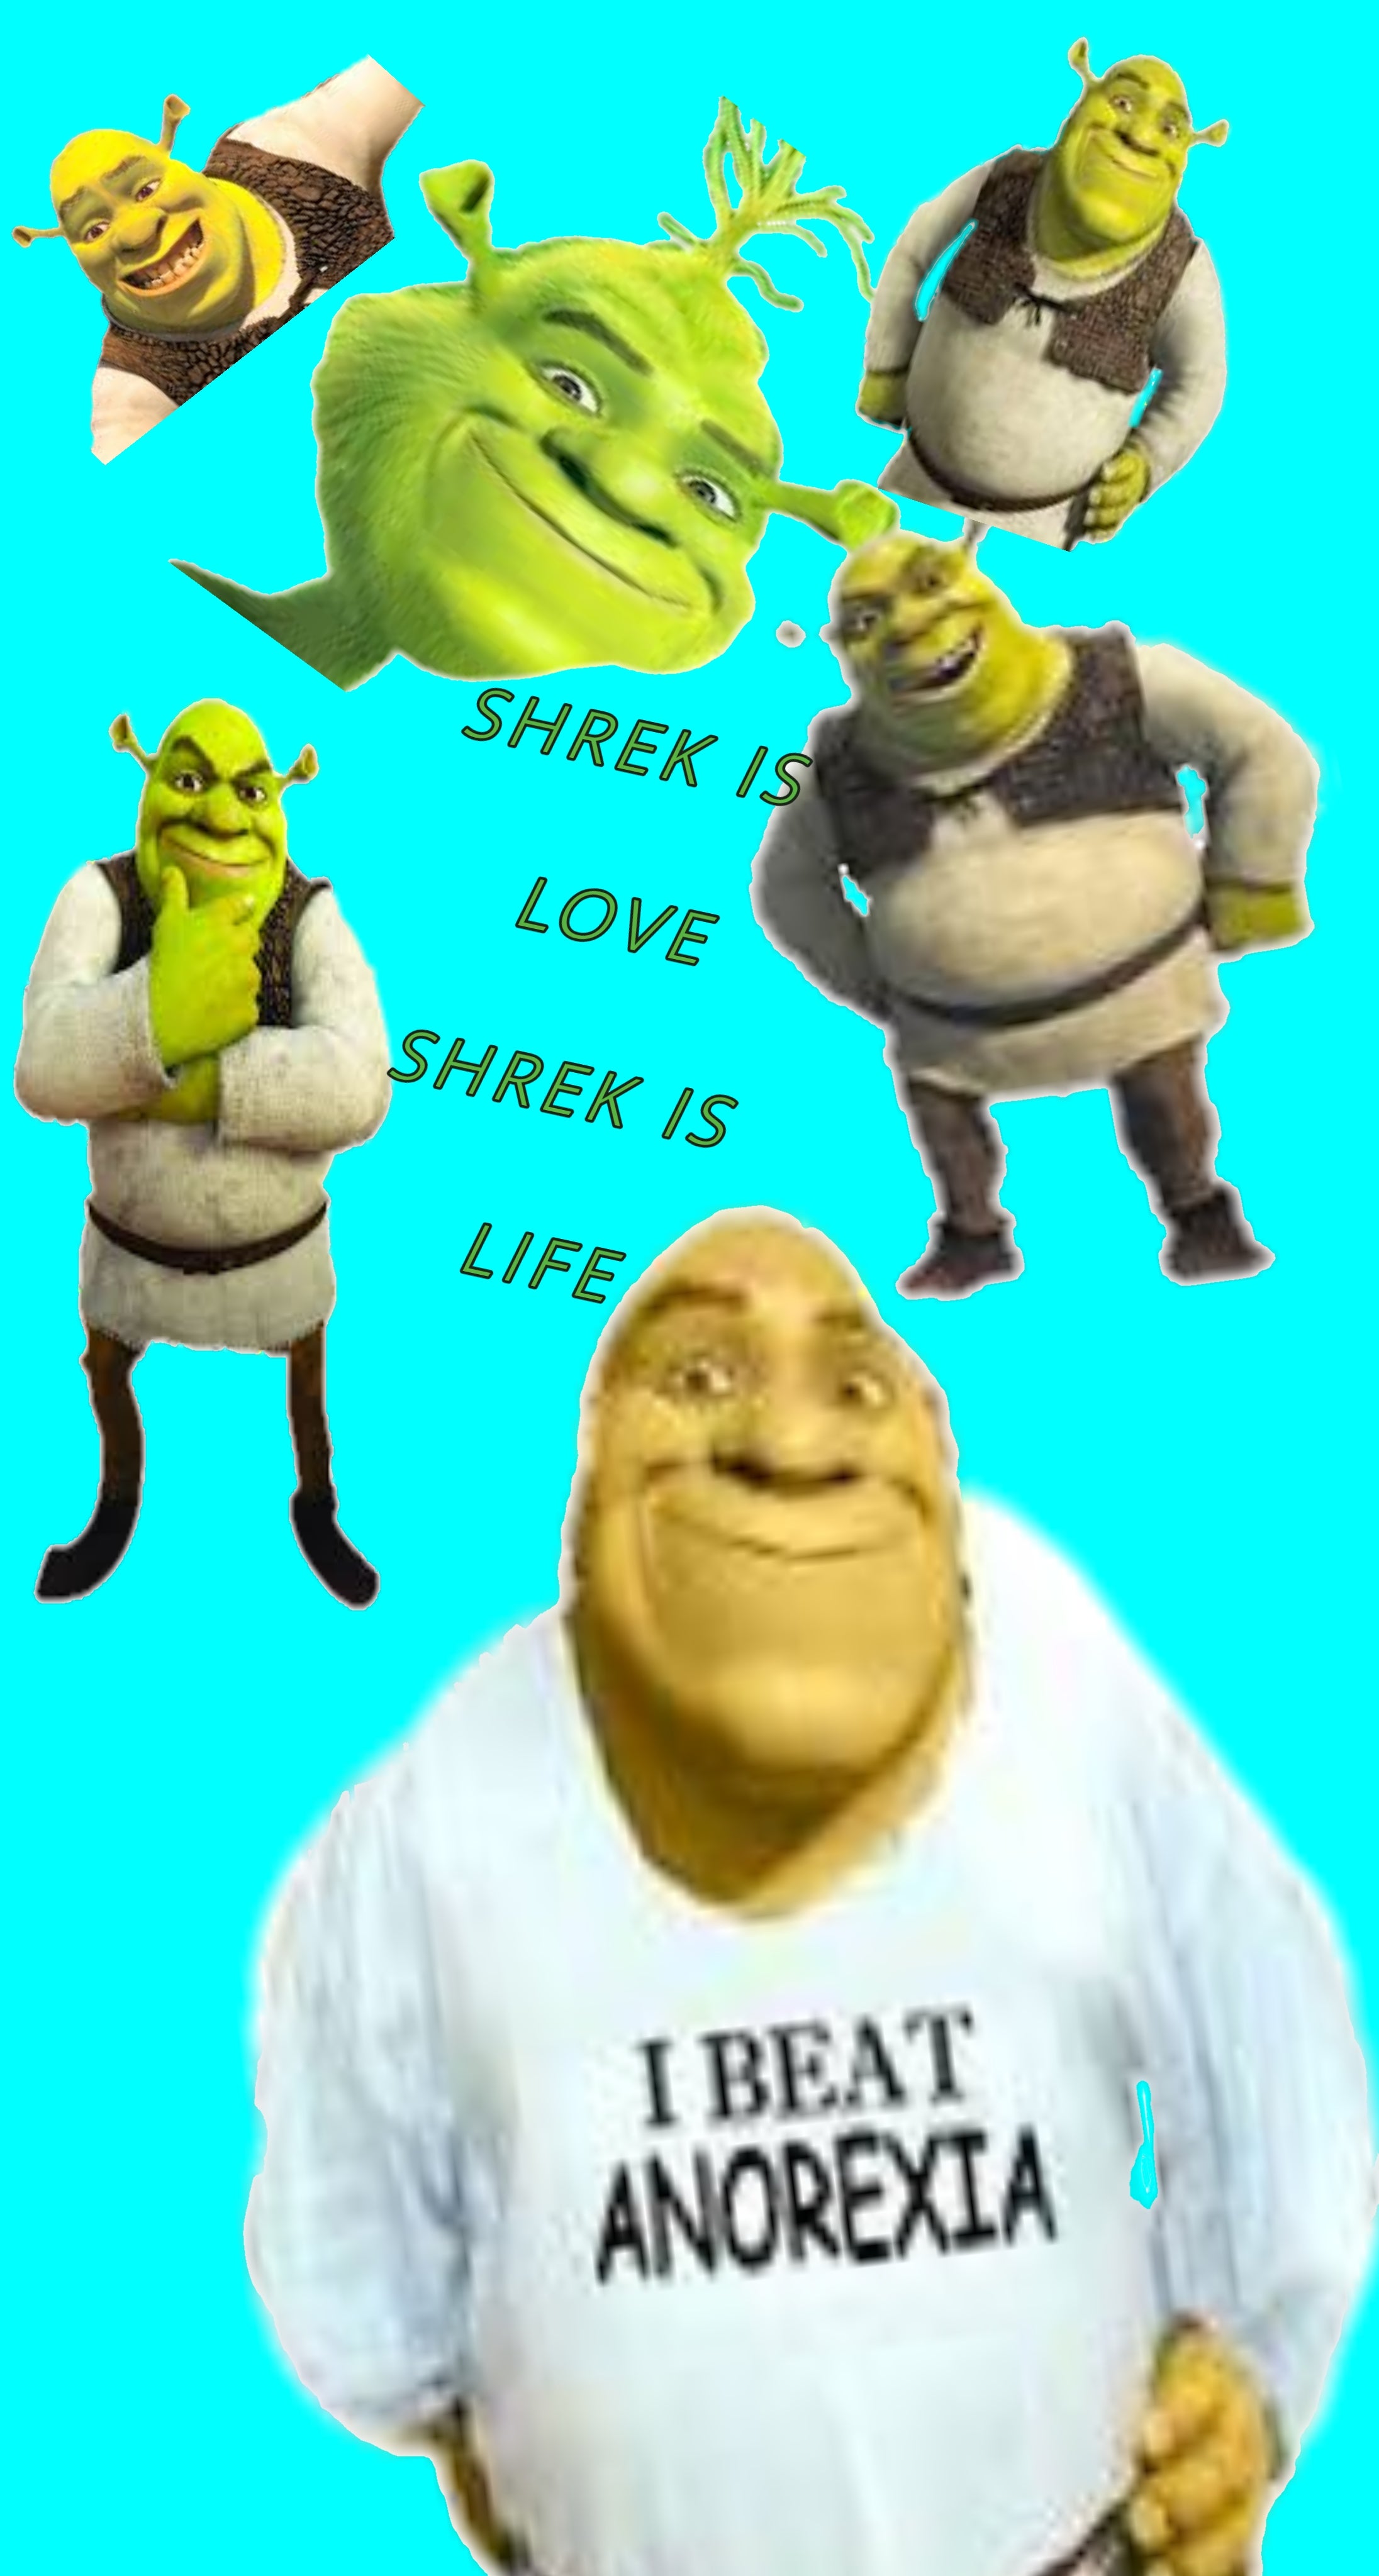 I made a background from random shrek photo I found please don't take any of it too seriously